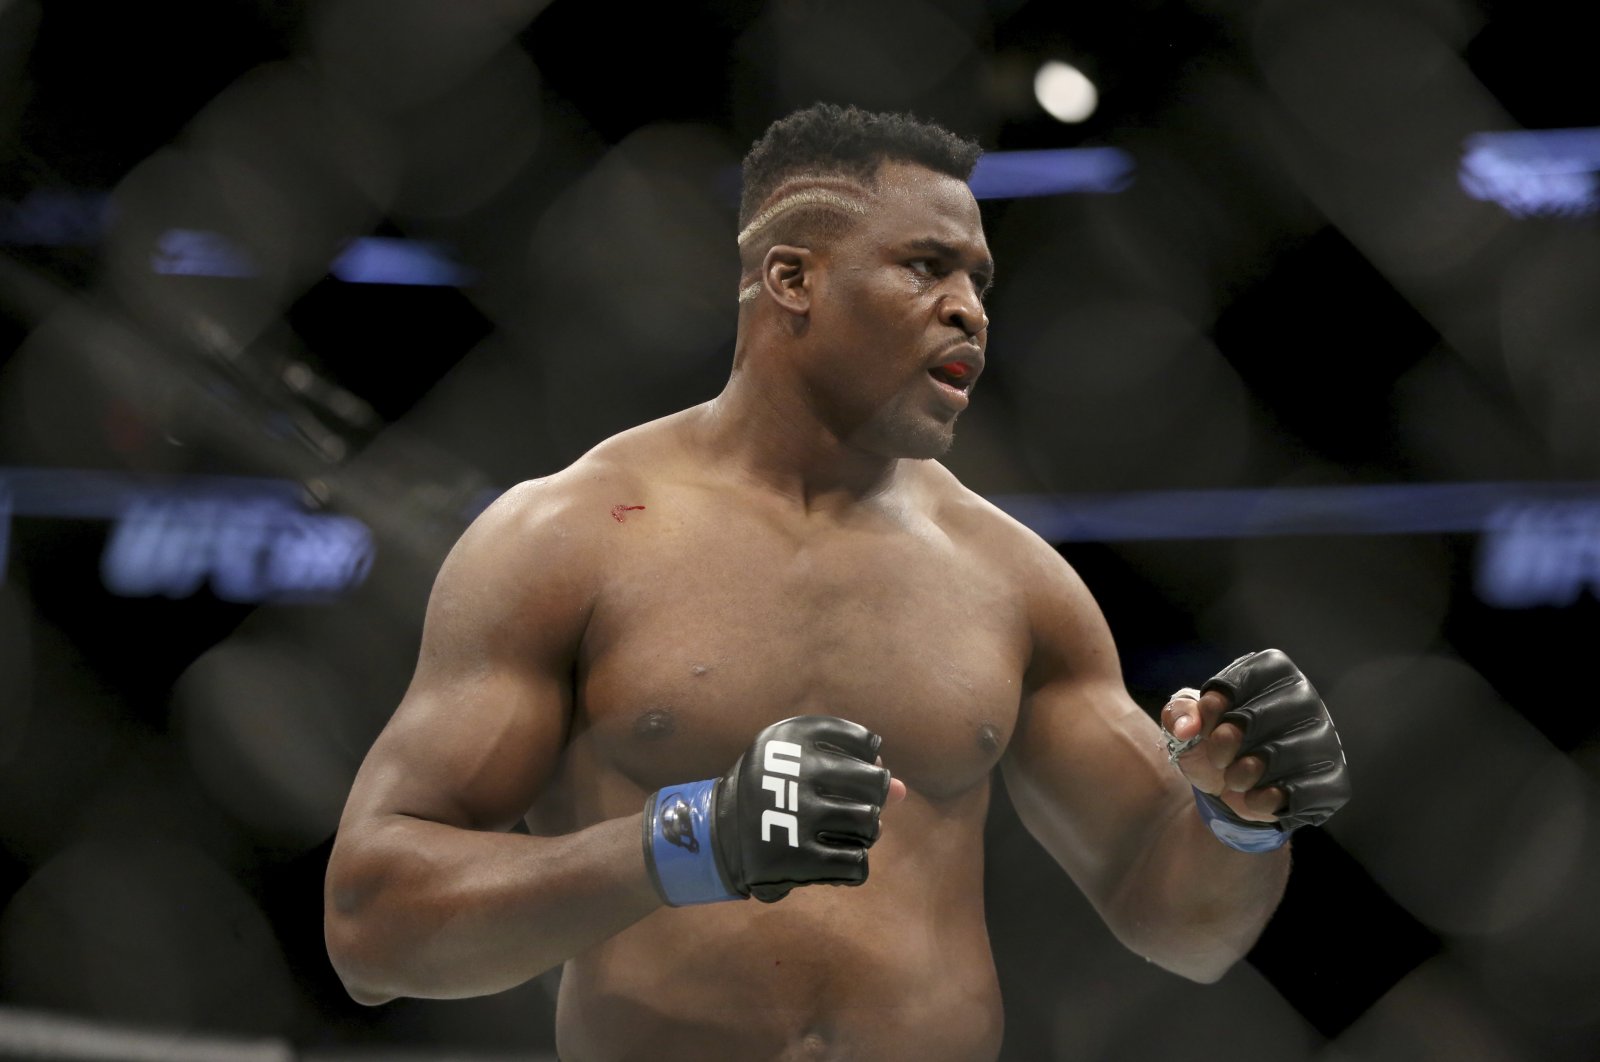 Francis Ngannou in action during a heavyweight championship MMA bout against Stipe Miocic at UFC 220, Boston, U.S., Jan. 21, 2018. (AP Photo)